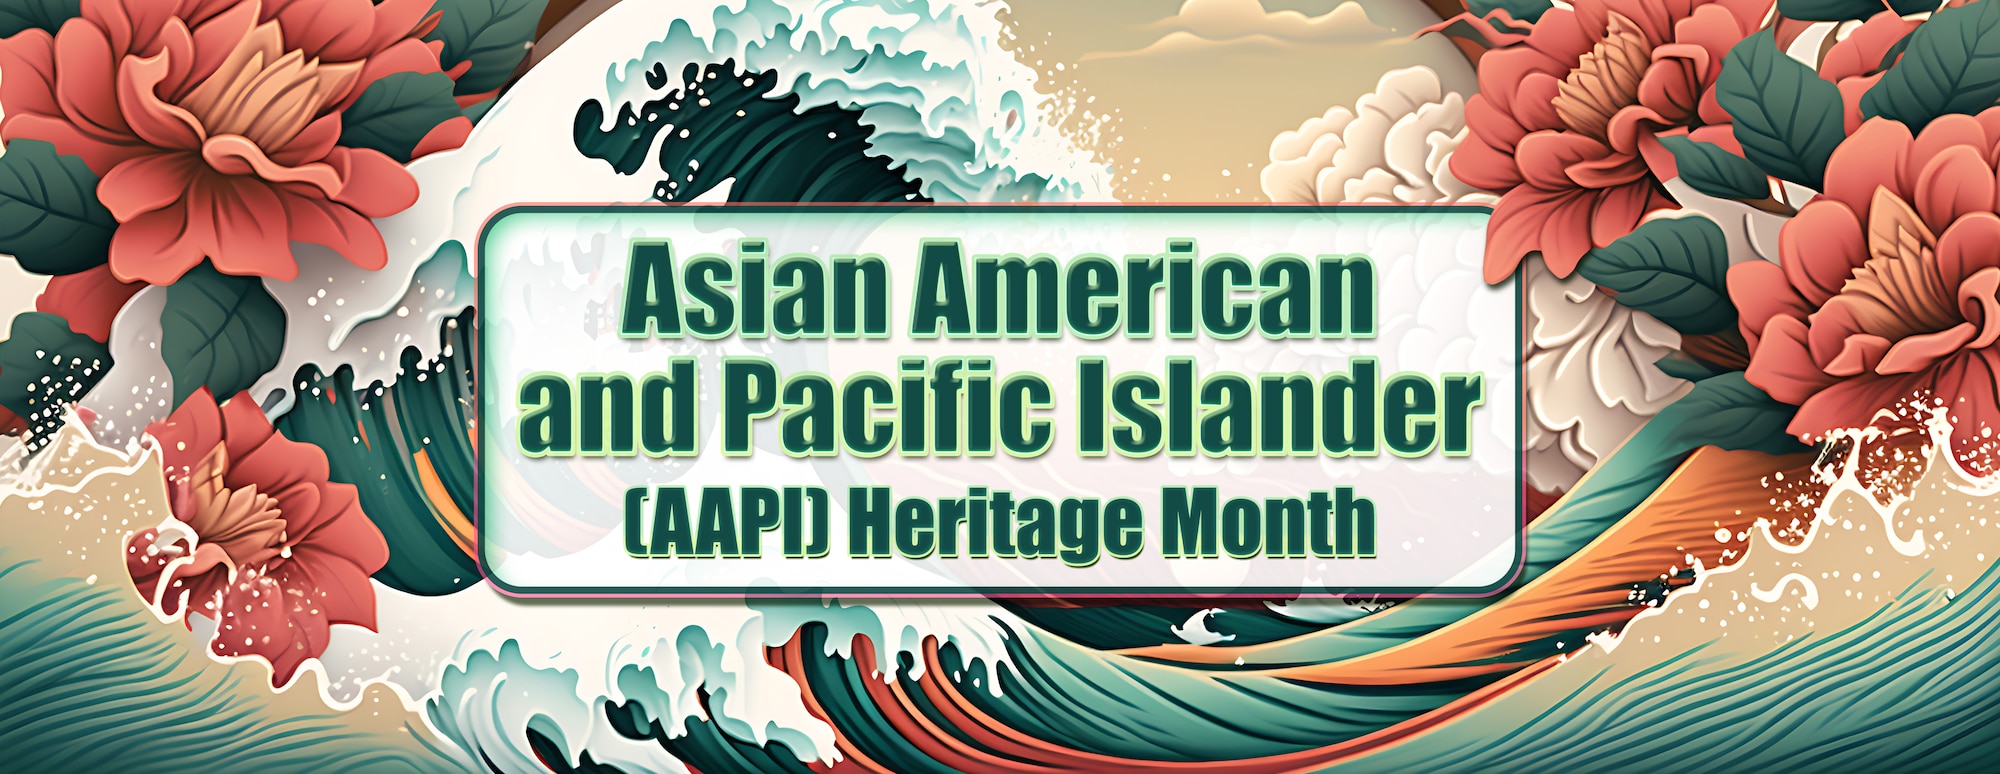 Asian American and Pacific Islander (AAPI) Heritage Month. Illustration of tropical flowers and cresting ocean wave. Modified Illustration: © DM/stock.adobe.com [image is not public domain]